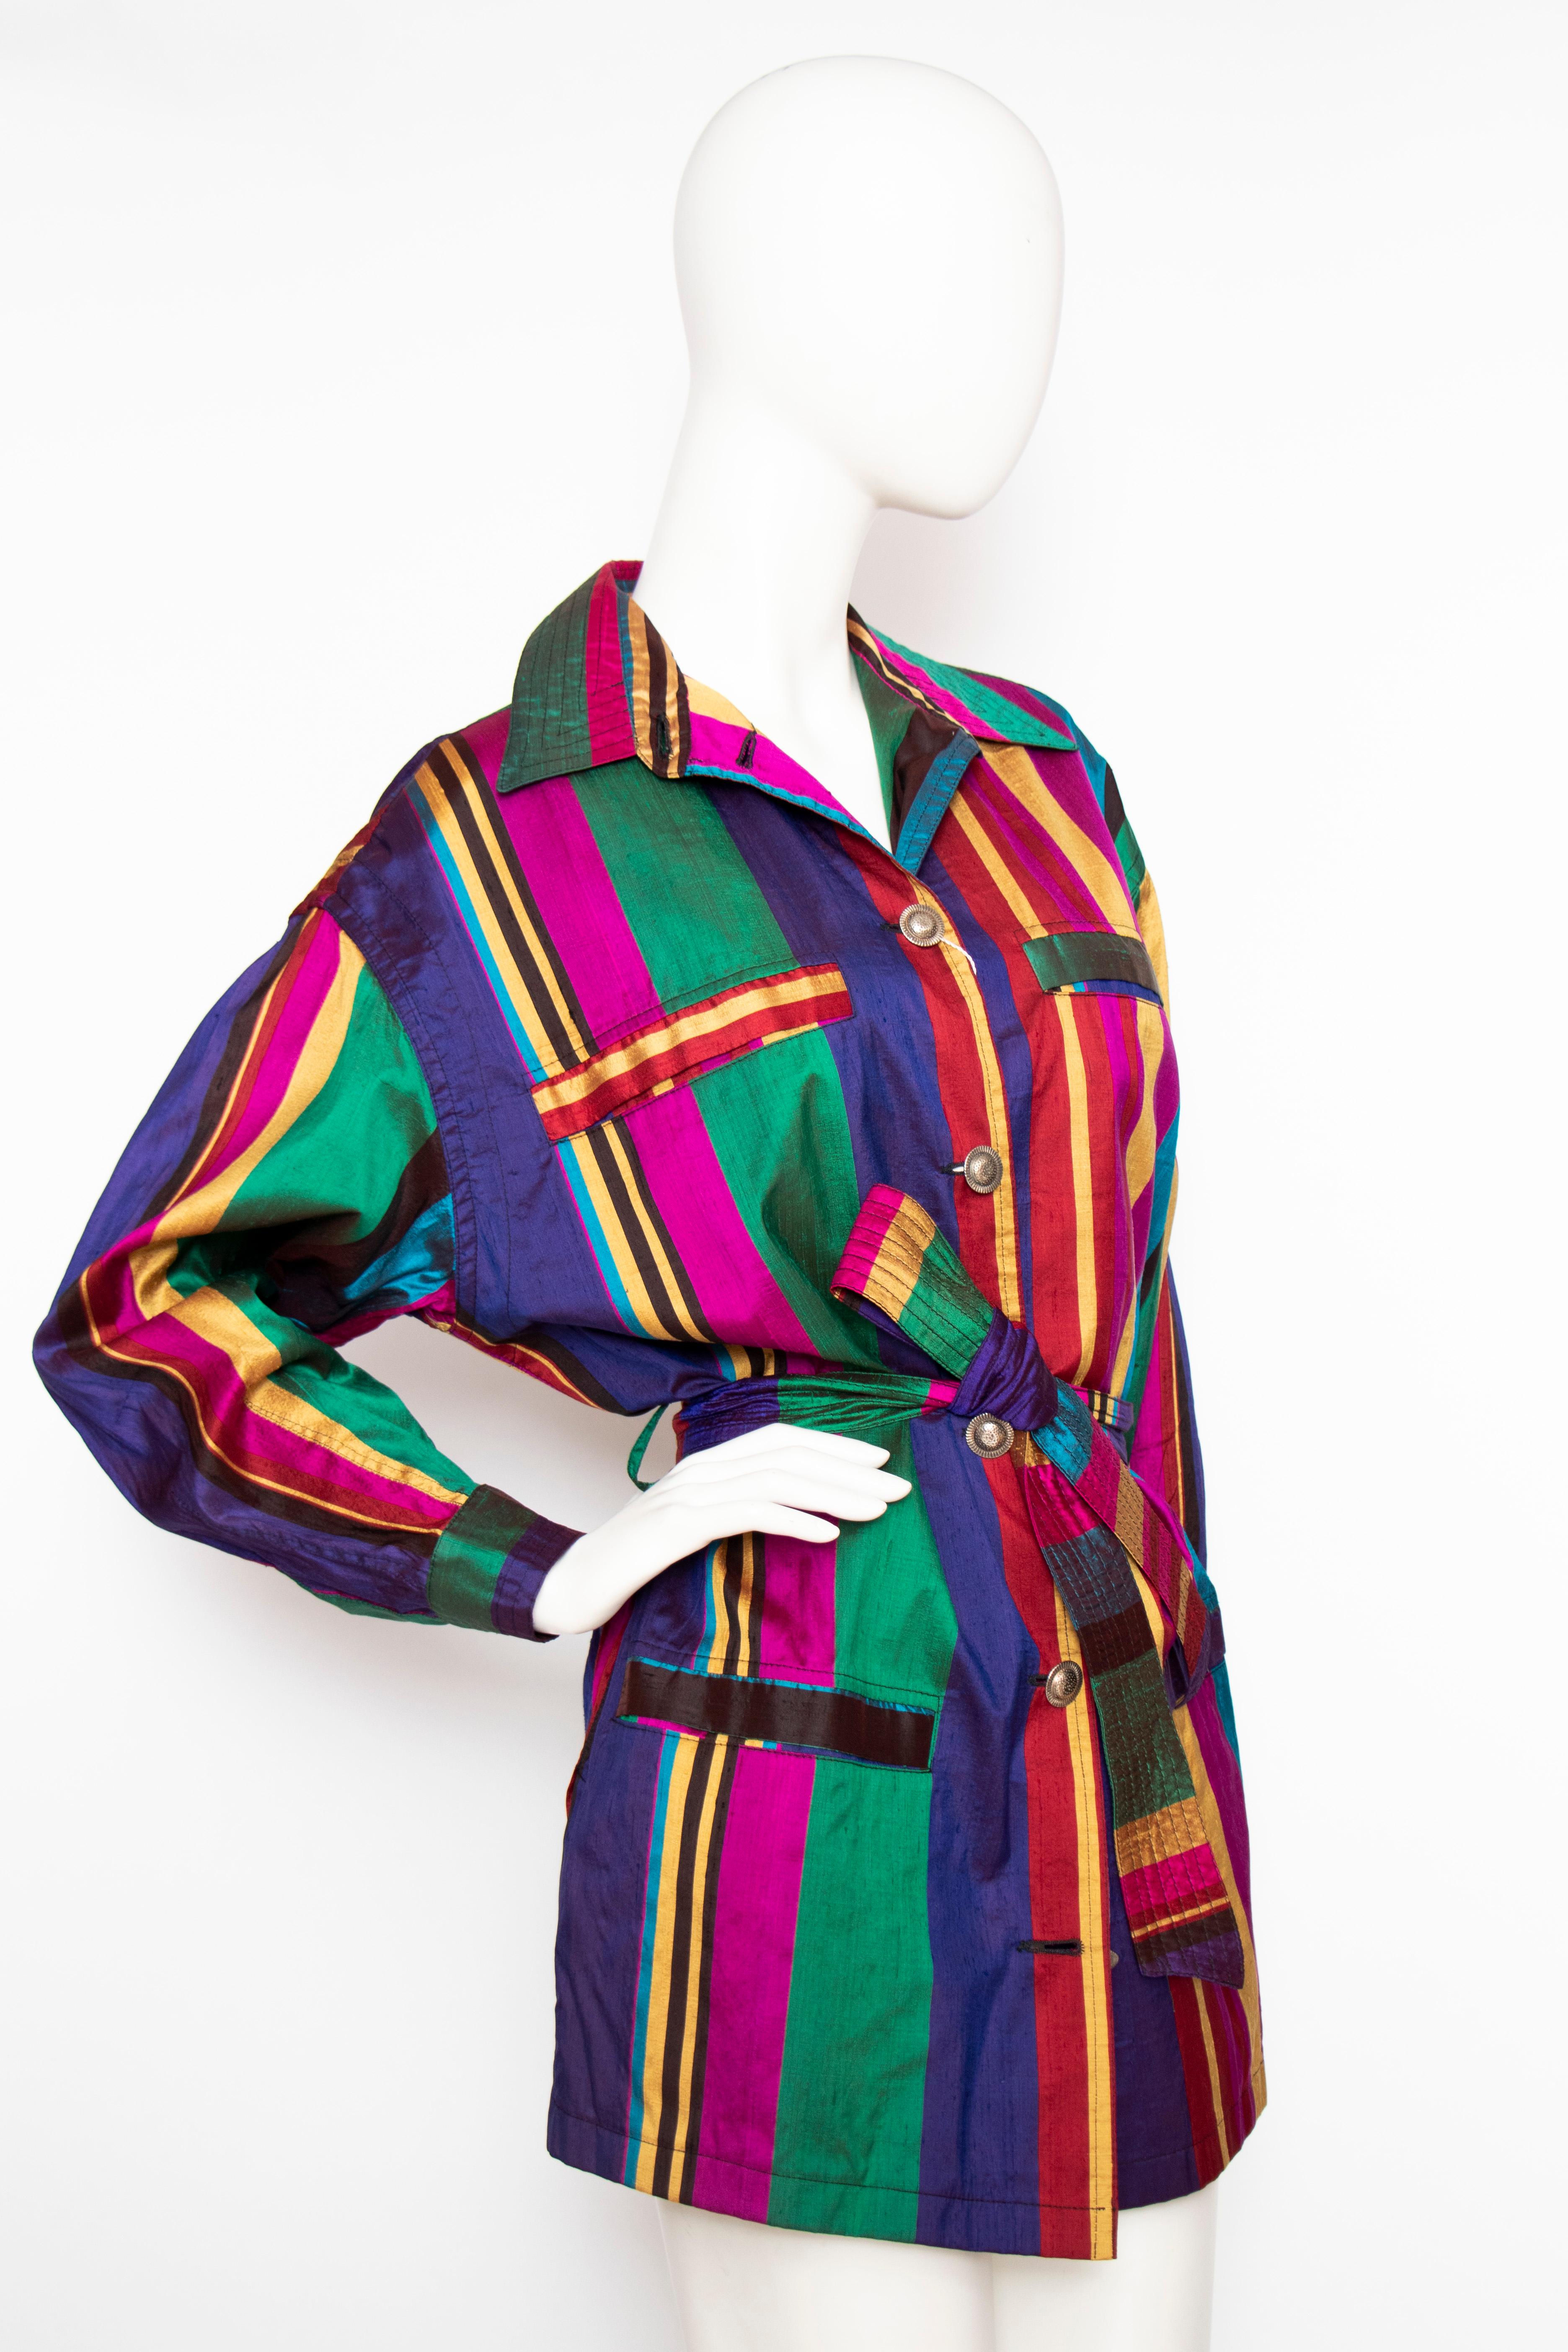 A 1990s vintage Versace Sport Thai silk trench jacket with a buttoned-down front, multiple pockets and a matching waist-belt. The beautiful silk is held in deep bright colours and the silver-toned buttons are engraved. 

The jacket is unlined.

The